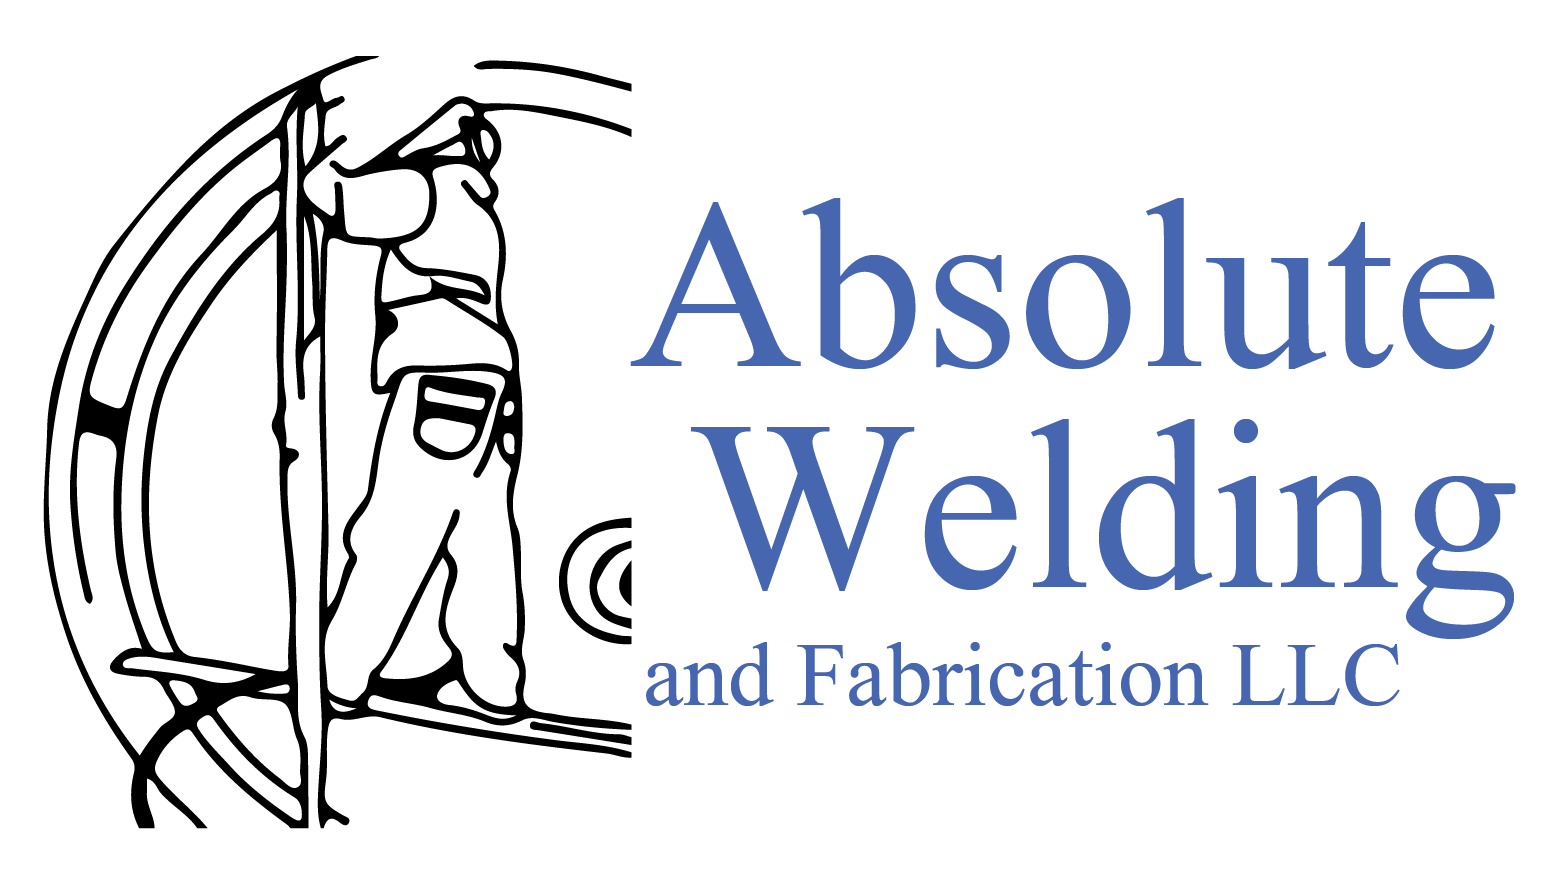 Absolute Welding and Fabrication